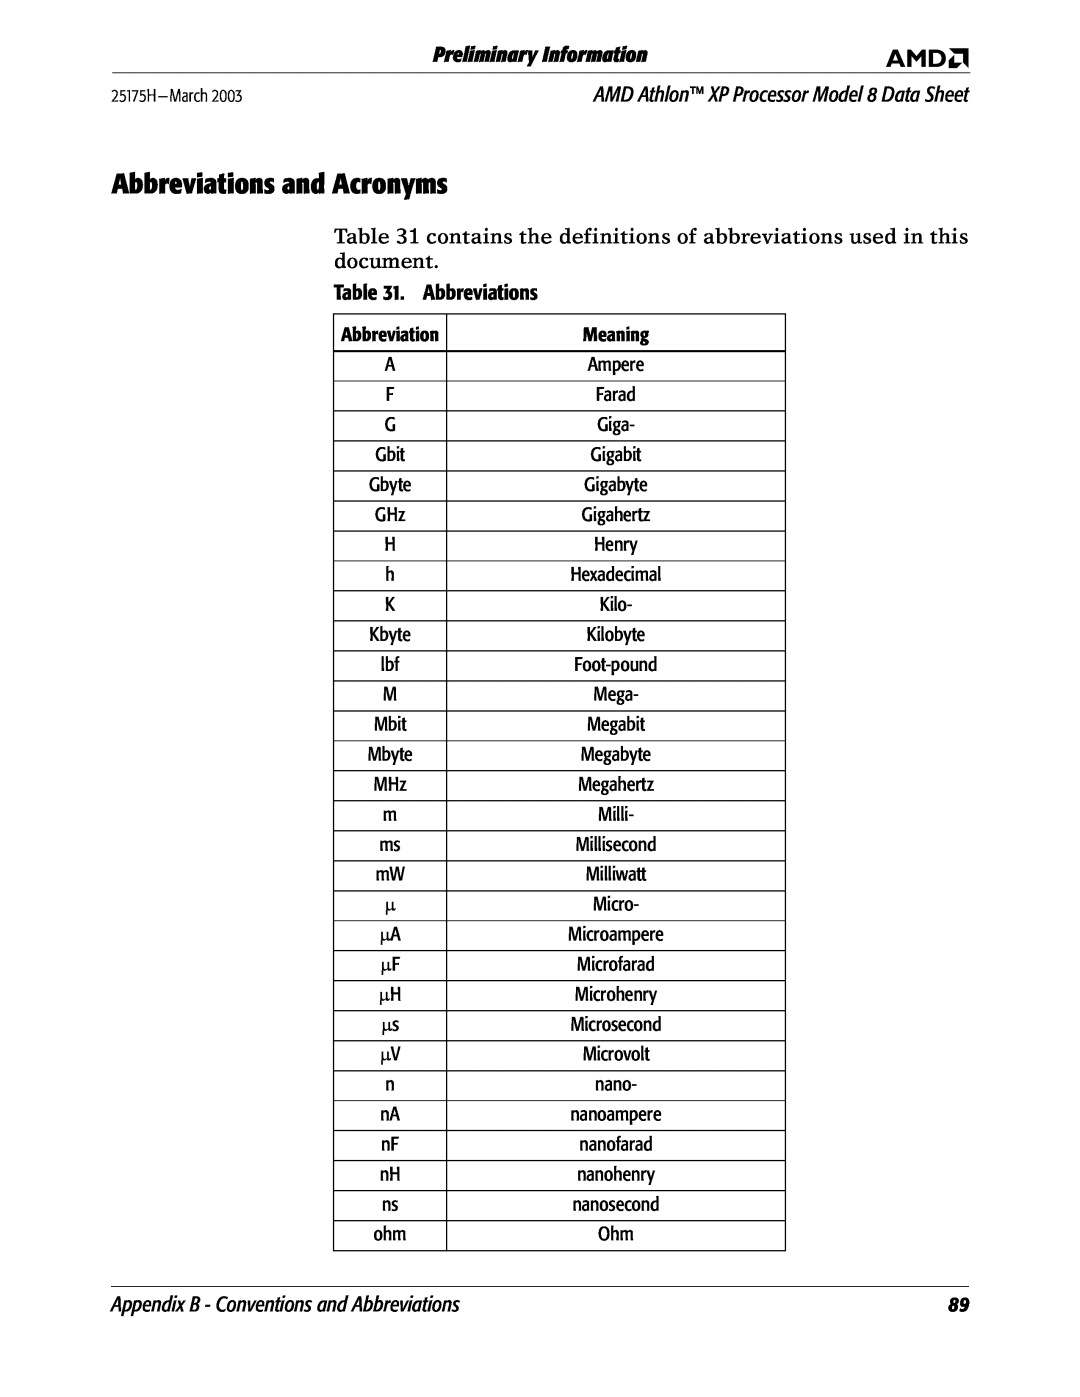 AMD 8 manual Abbreviations and Acronyms, Preliminary Information, Appendix B - Conventions and Abbreviations 